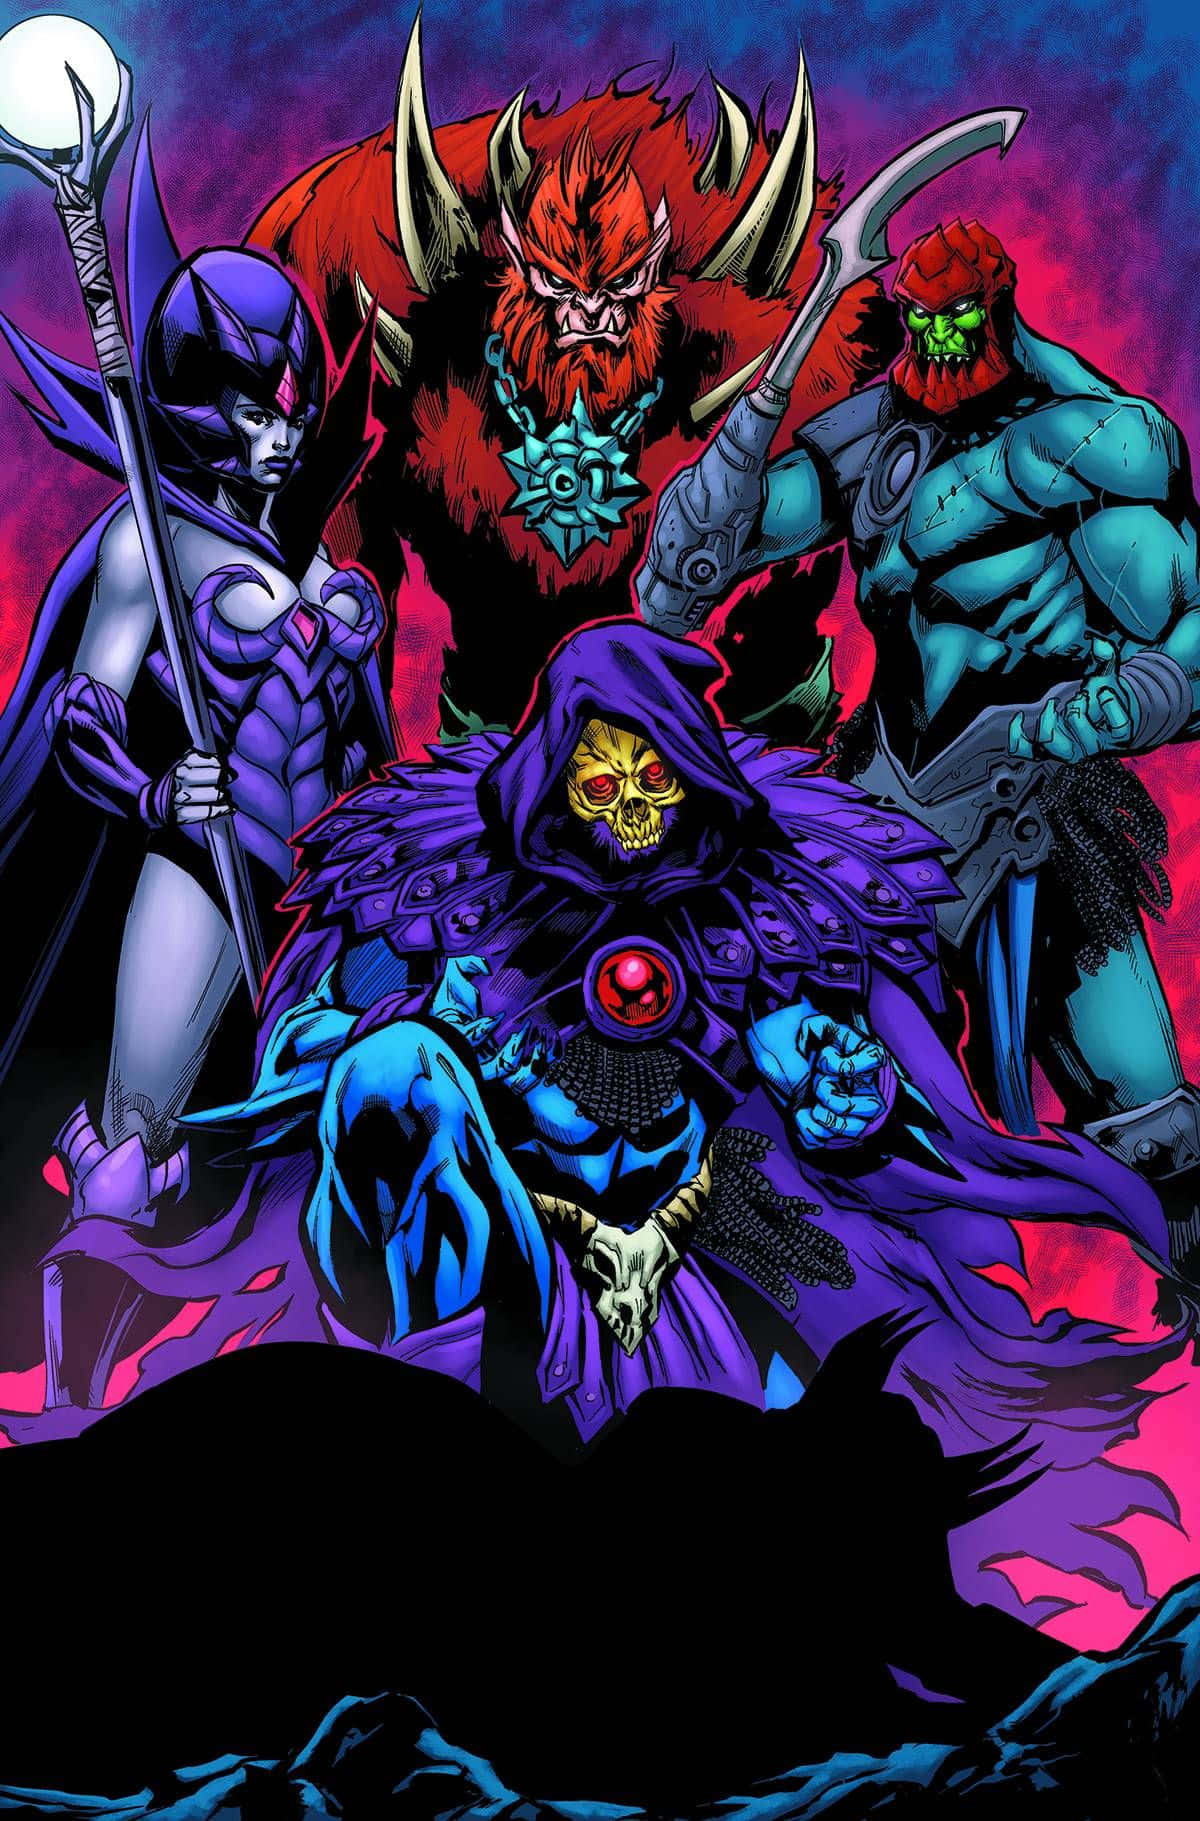 From left to right: The Masters of Evil assemble Wallpaper